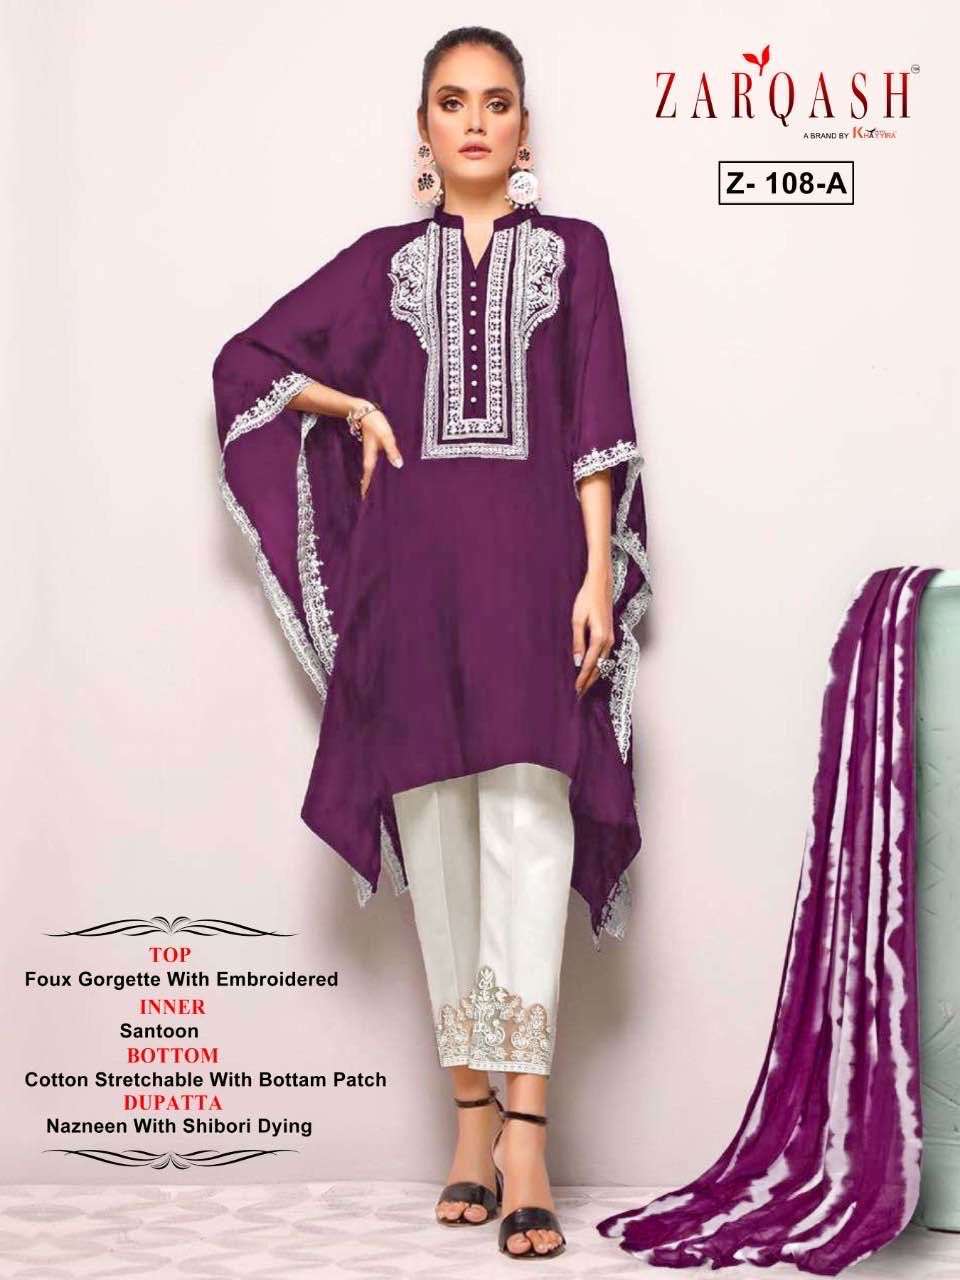 ZARQASH Z 108 HEAVY COTTON EMBROIDERY READYMADE SALWAR SUITS...